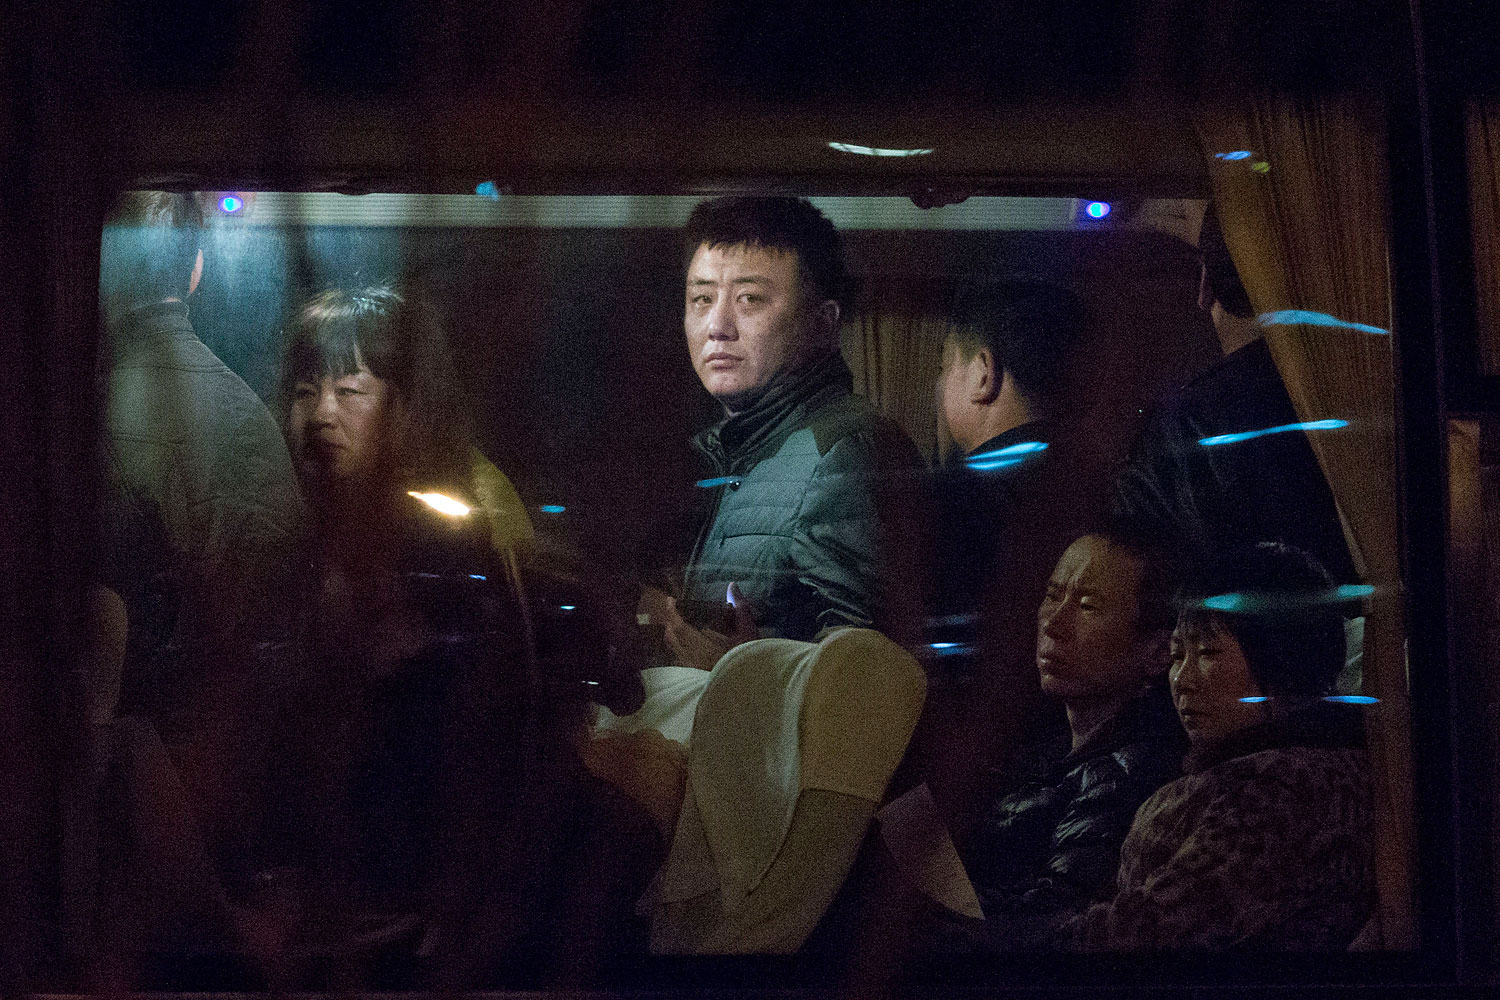 Relatives of Chinese passengers aboard a missing Malaysia Airlines plane wait on a bus on theirway to get paper work to fly to Malaysia, in Beijing, March 9, 2014.